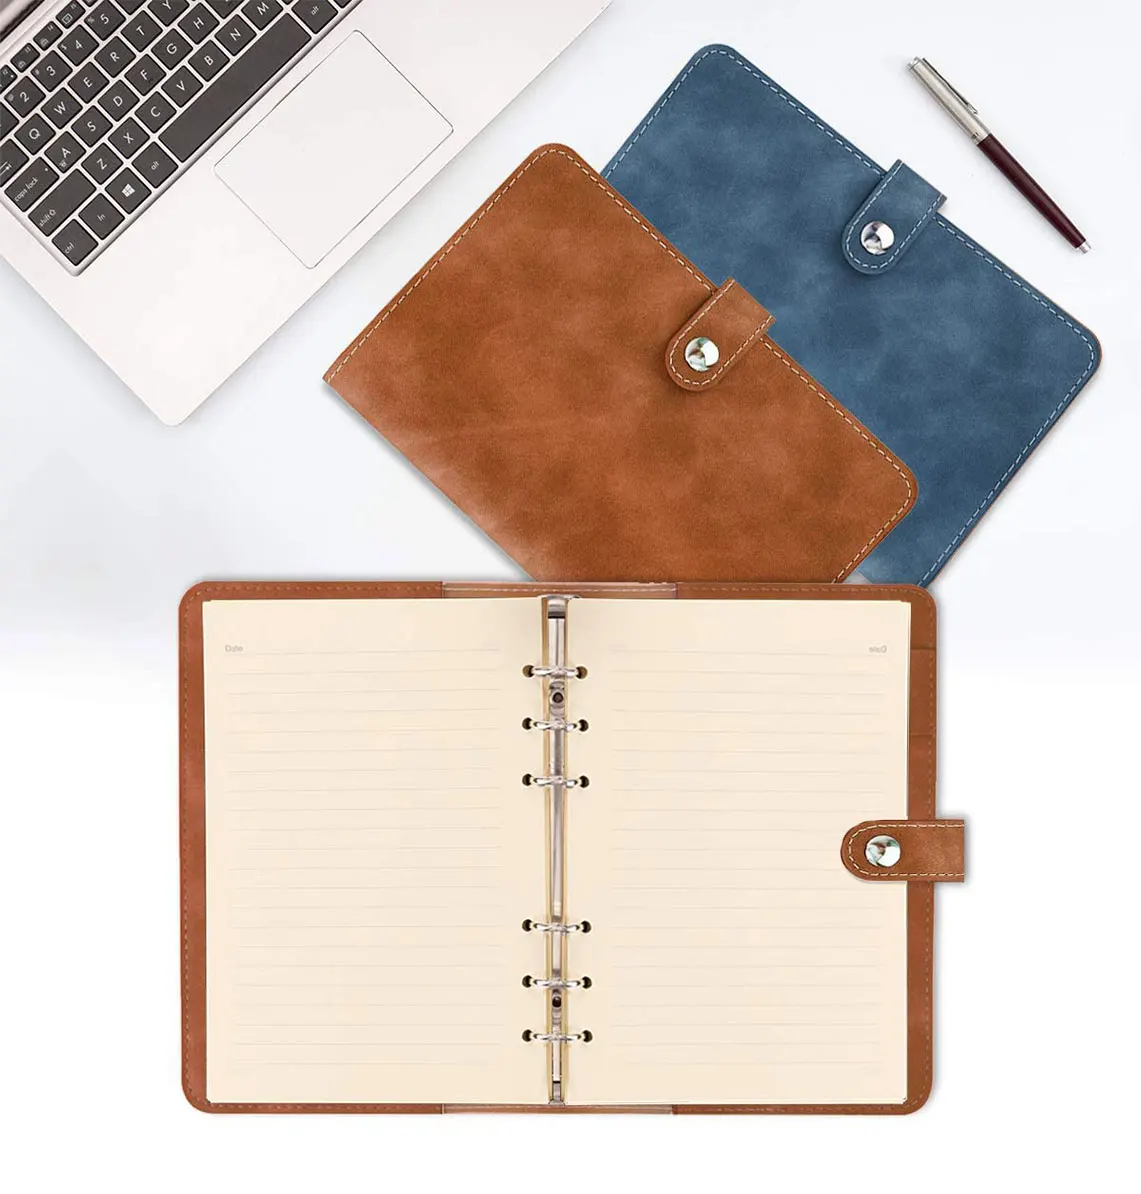 A6 Convenient And Practical 6-hole Loose Leaf Notebook Planner's Binder Diary Diary Ring Binder Kawaii School Supplies